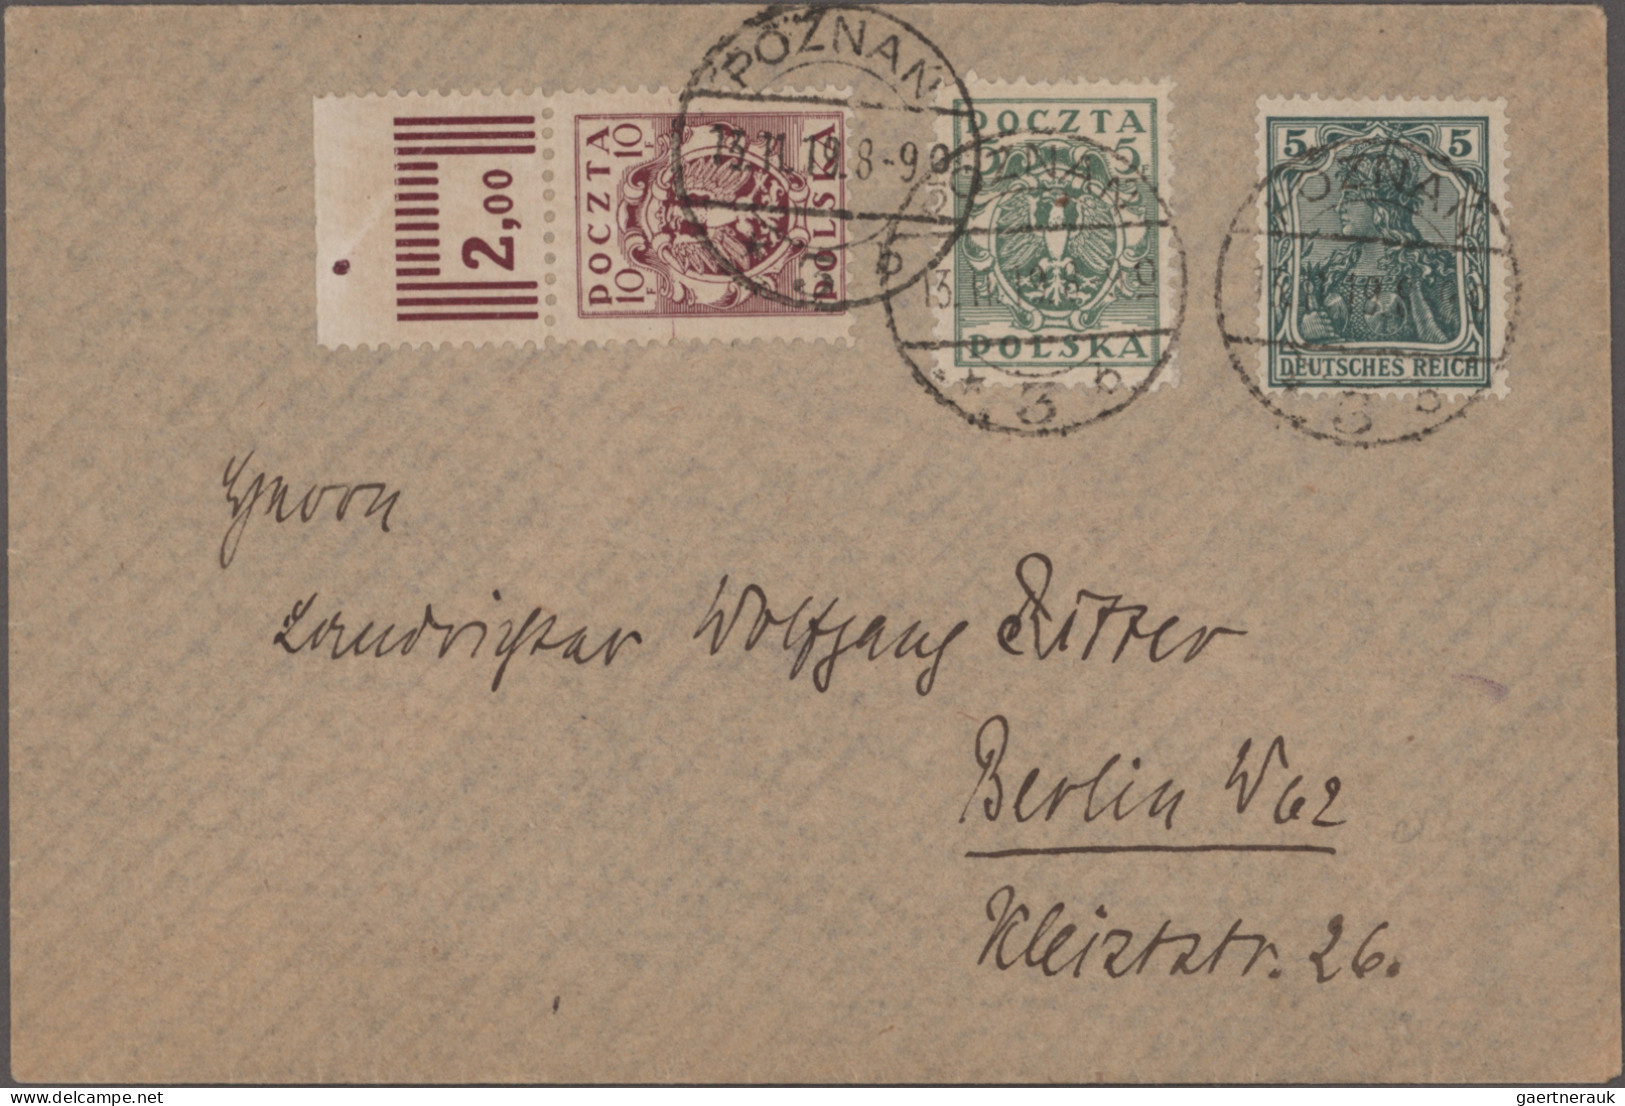 Poland: 1918/2005, extensive estate in a big box offering old to new material in